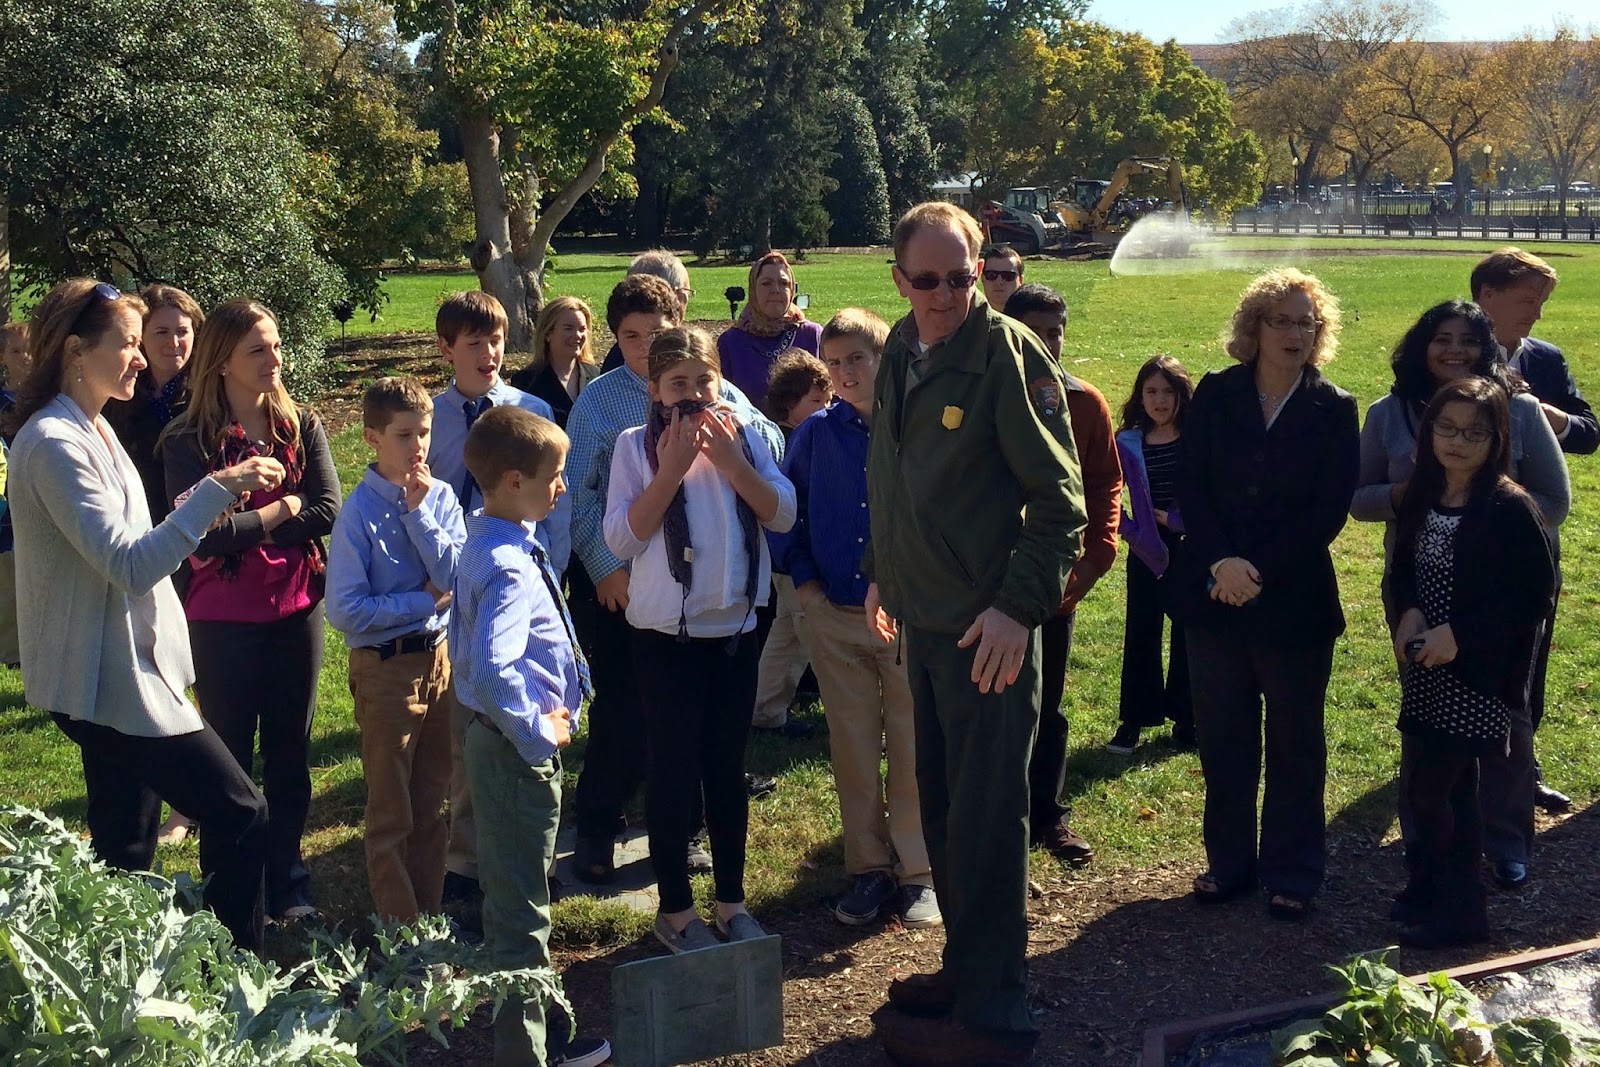 Hockomock YMCA Healthy Futures group visiting the White House garden